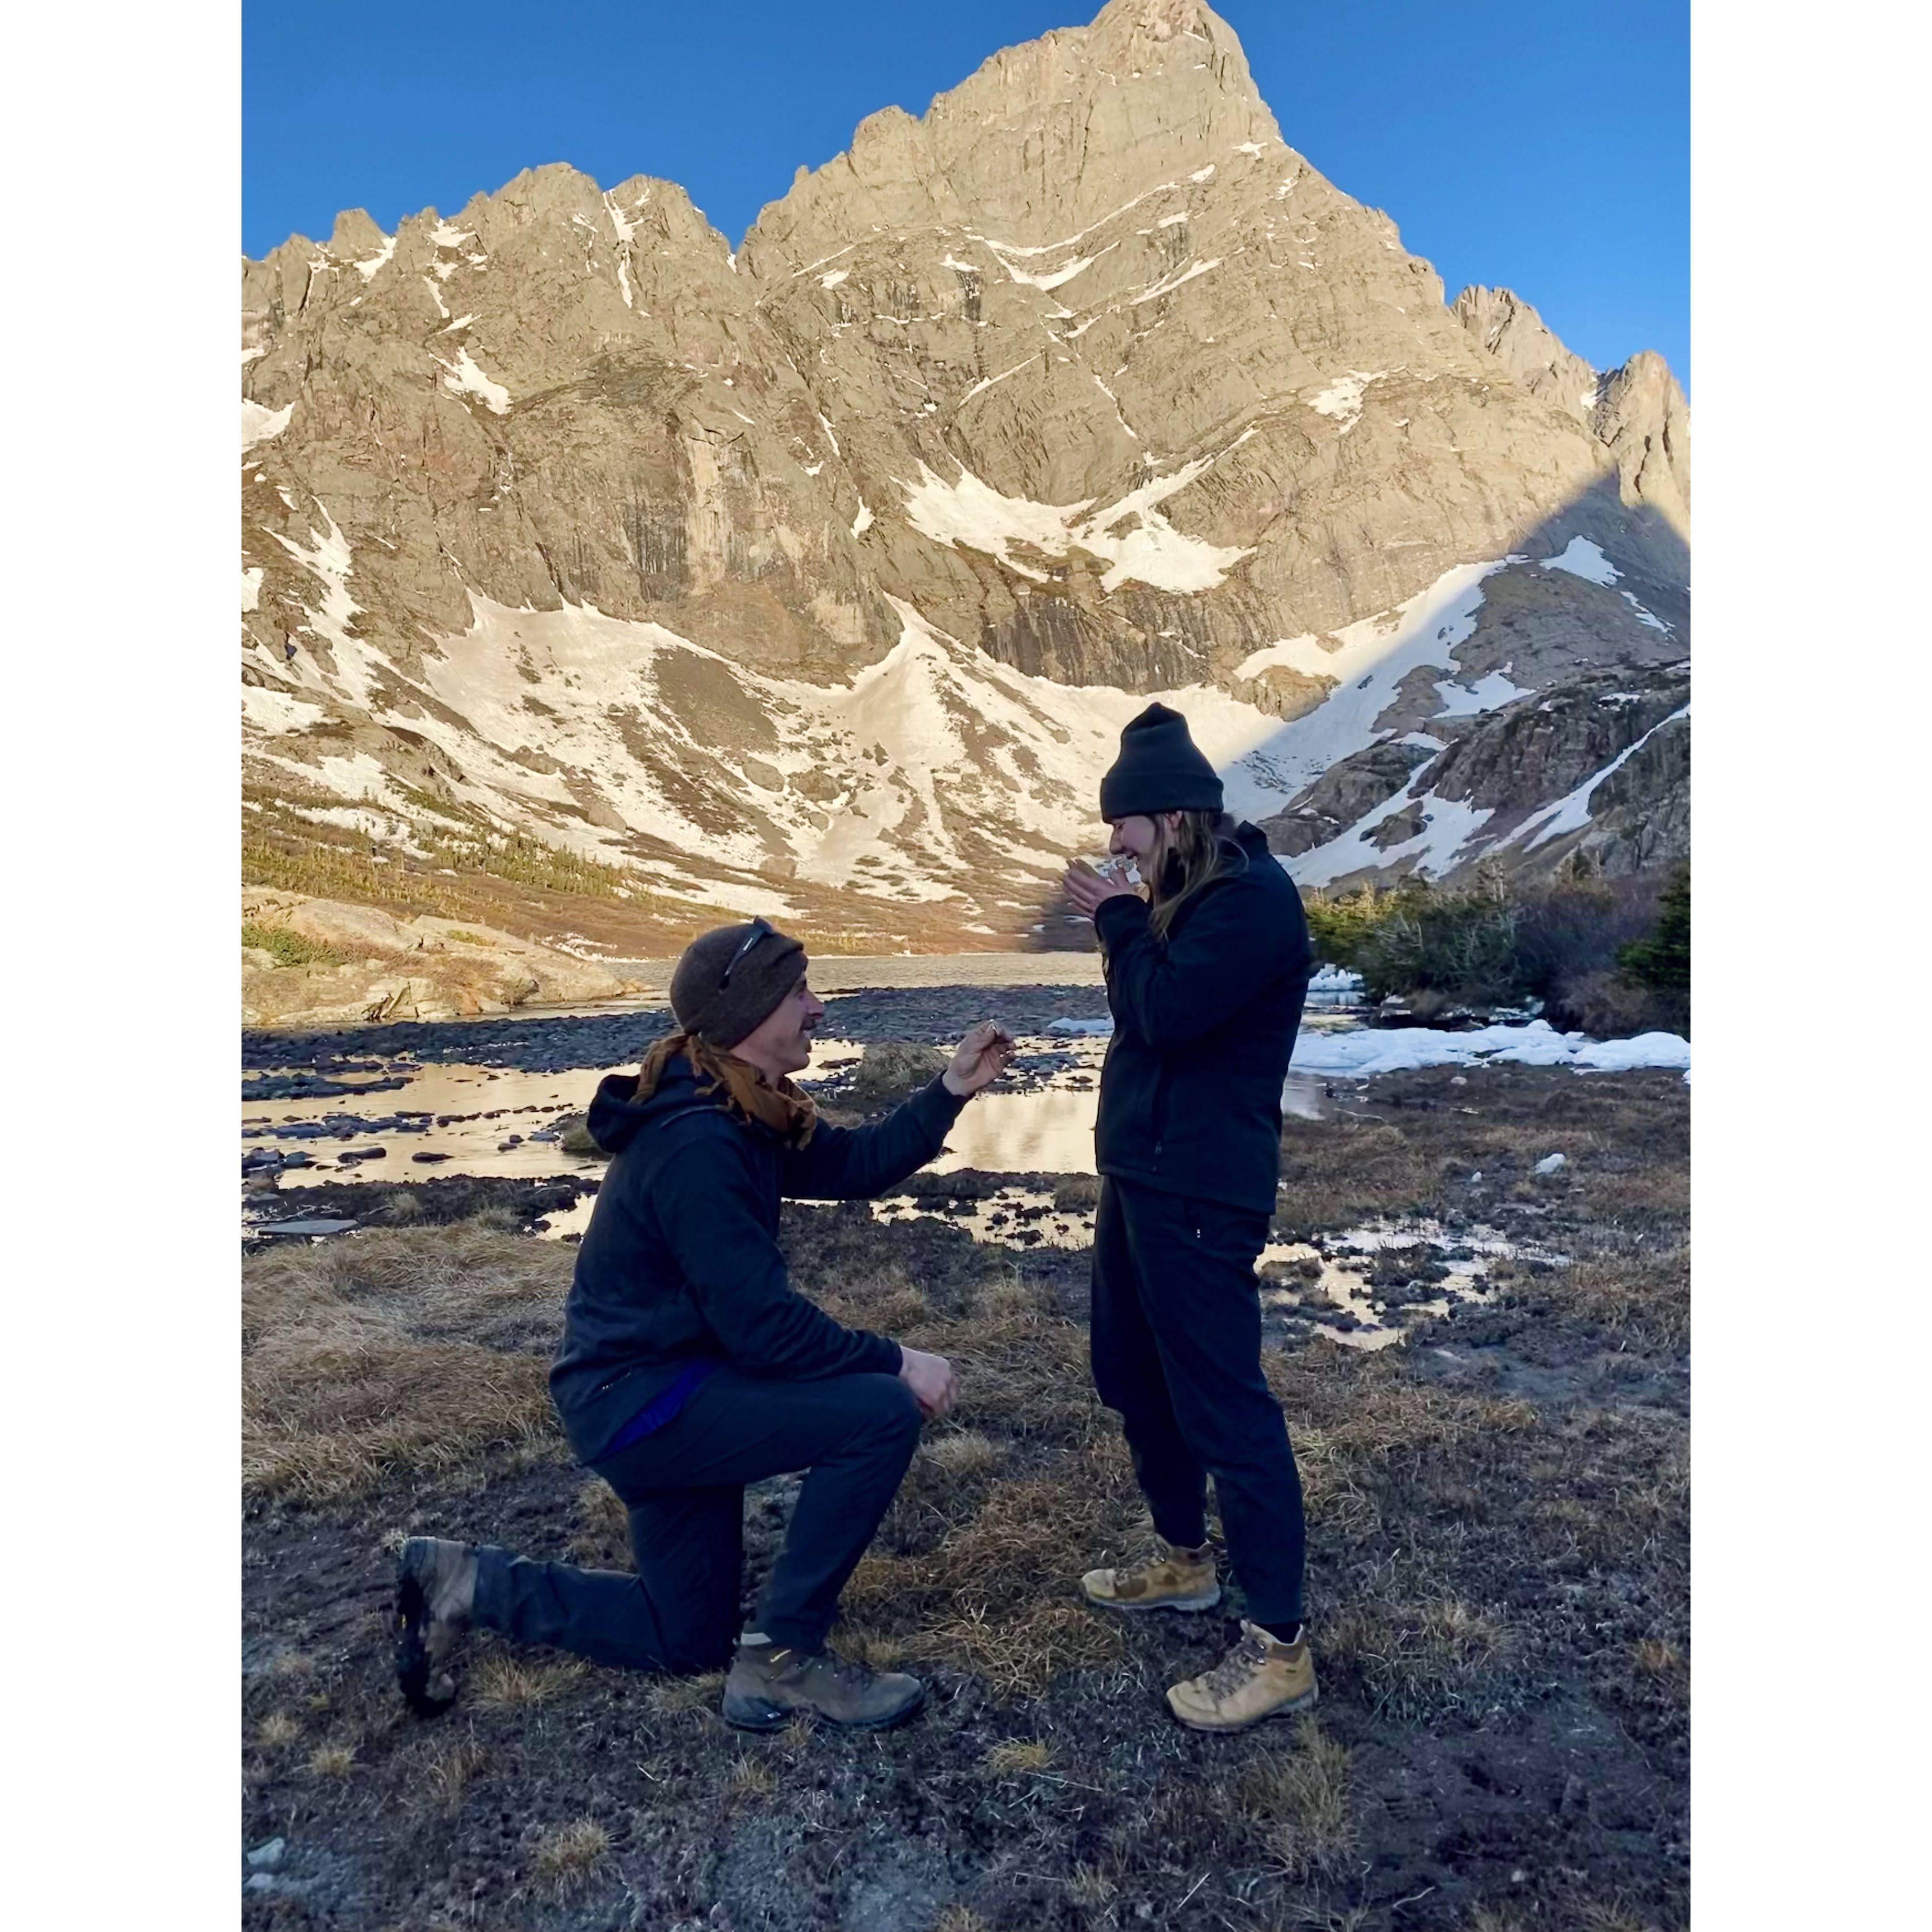 Mike proposing while hiking Mt Humbolt in Colorado!